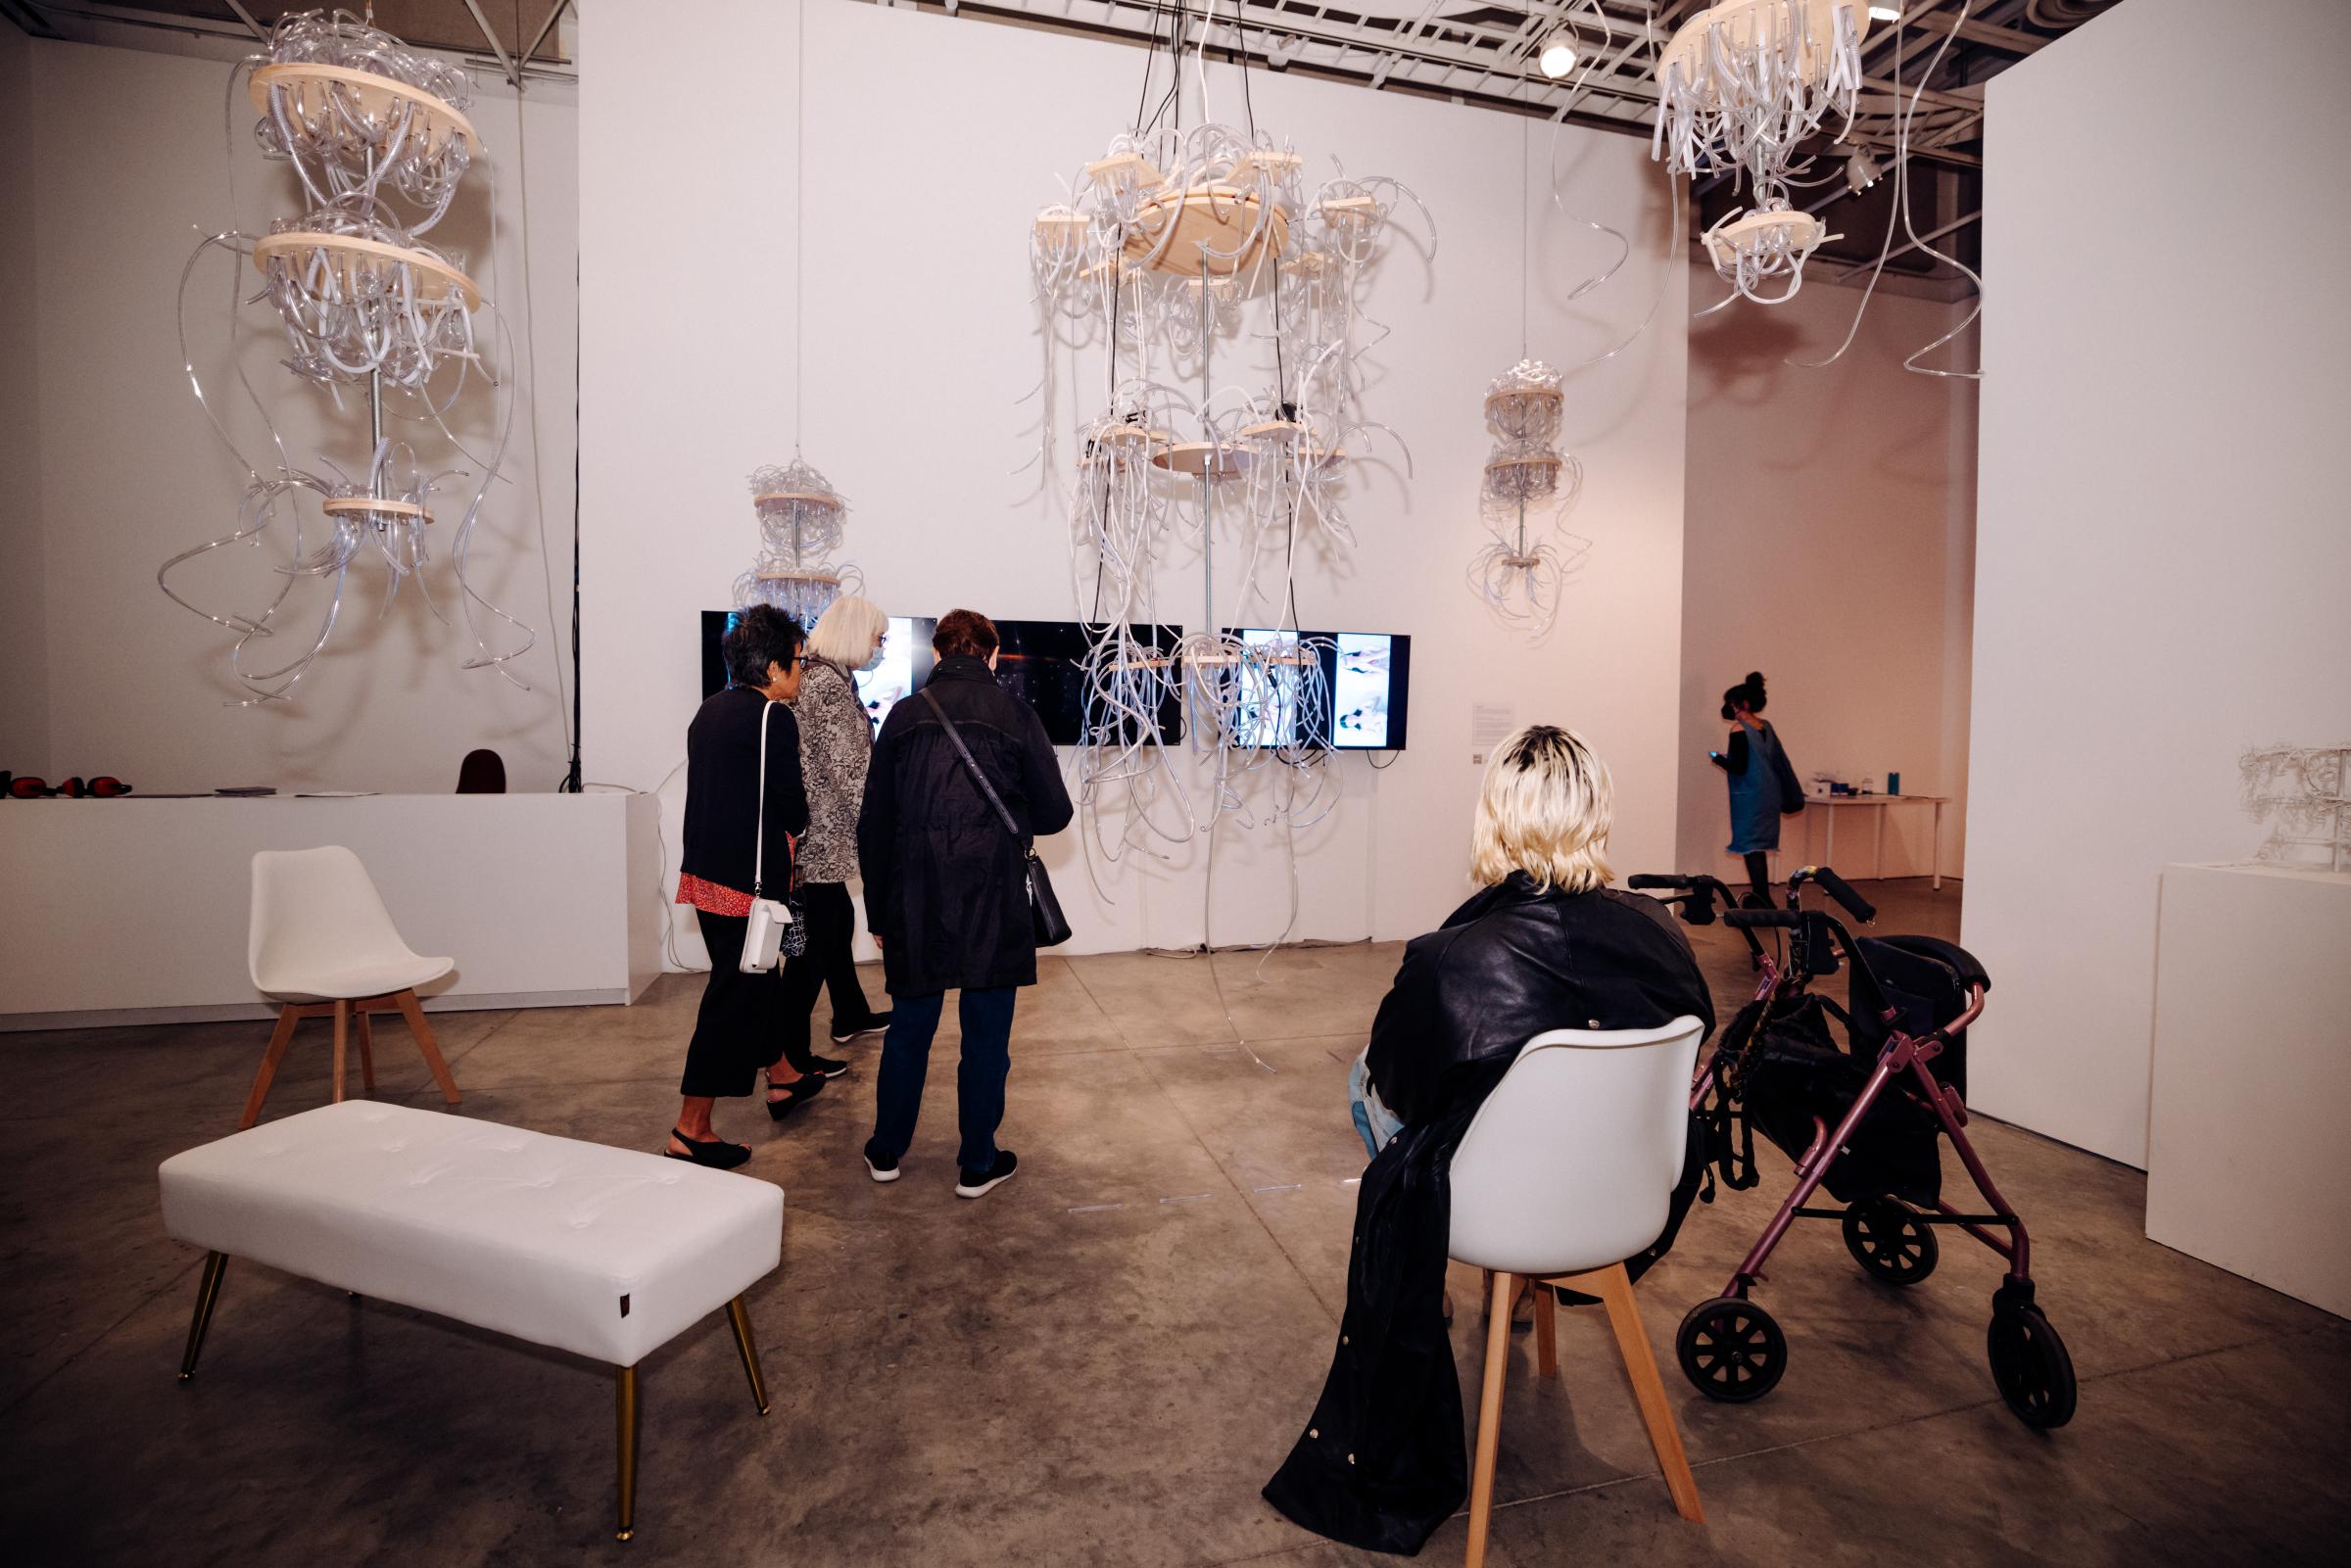 Three visitors standing and one visitor sitting, looking at multiple multi-tiered suspended chandeliers threaded with plastic and rubber tubing. 

